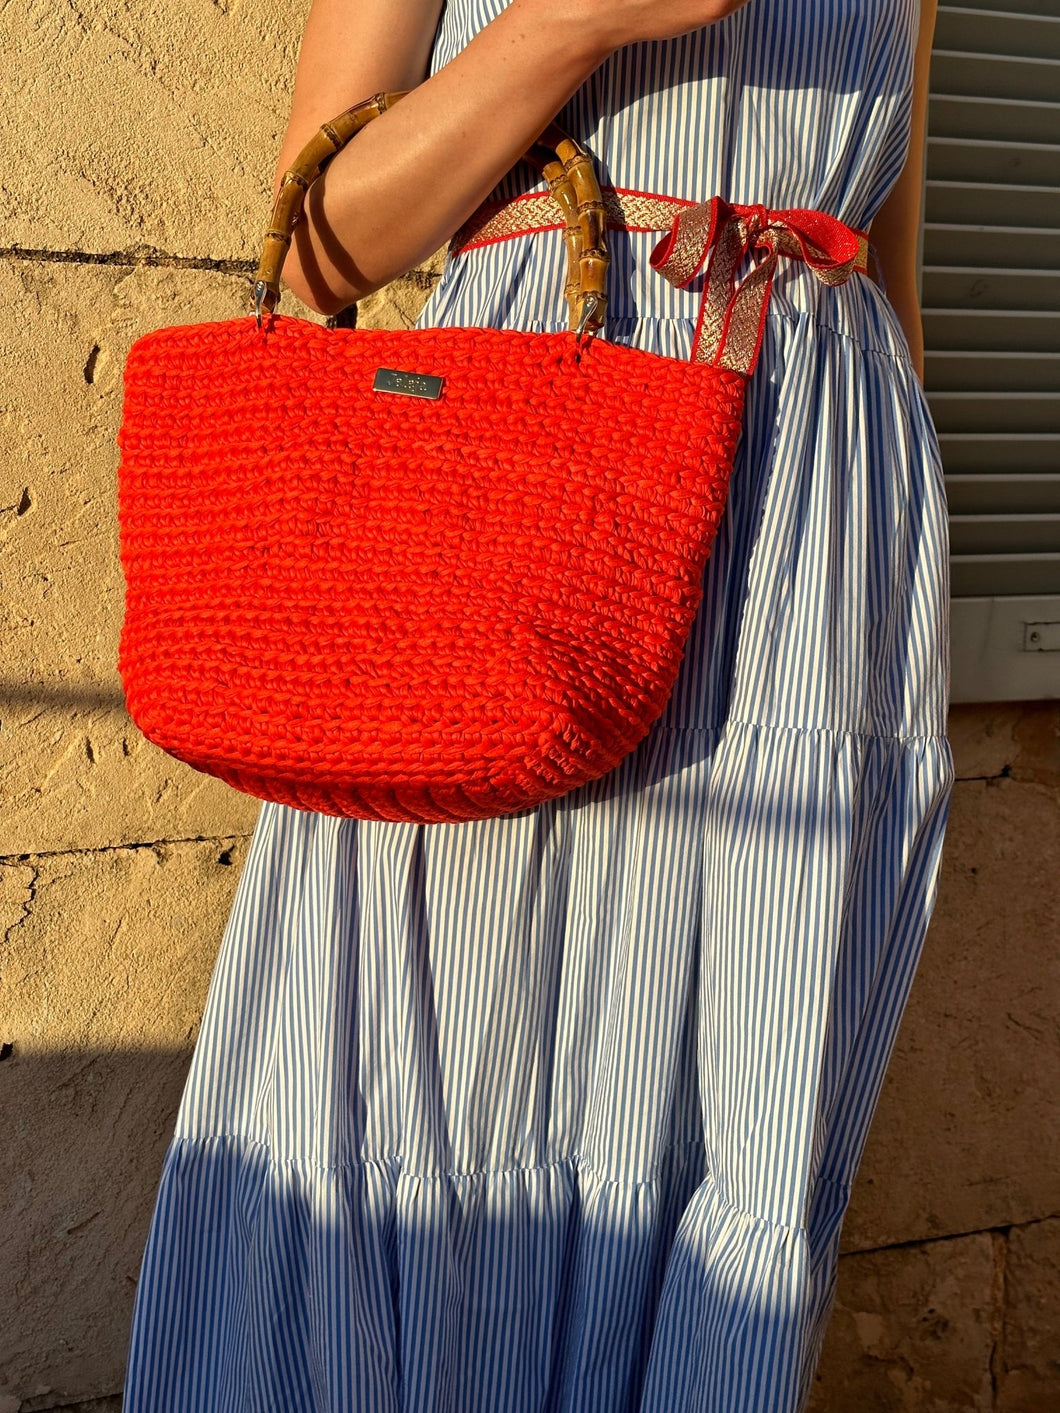 Handmade Bag With Coral Recycled Cotton And Bamboo Handles - Jeleja